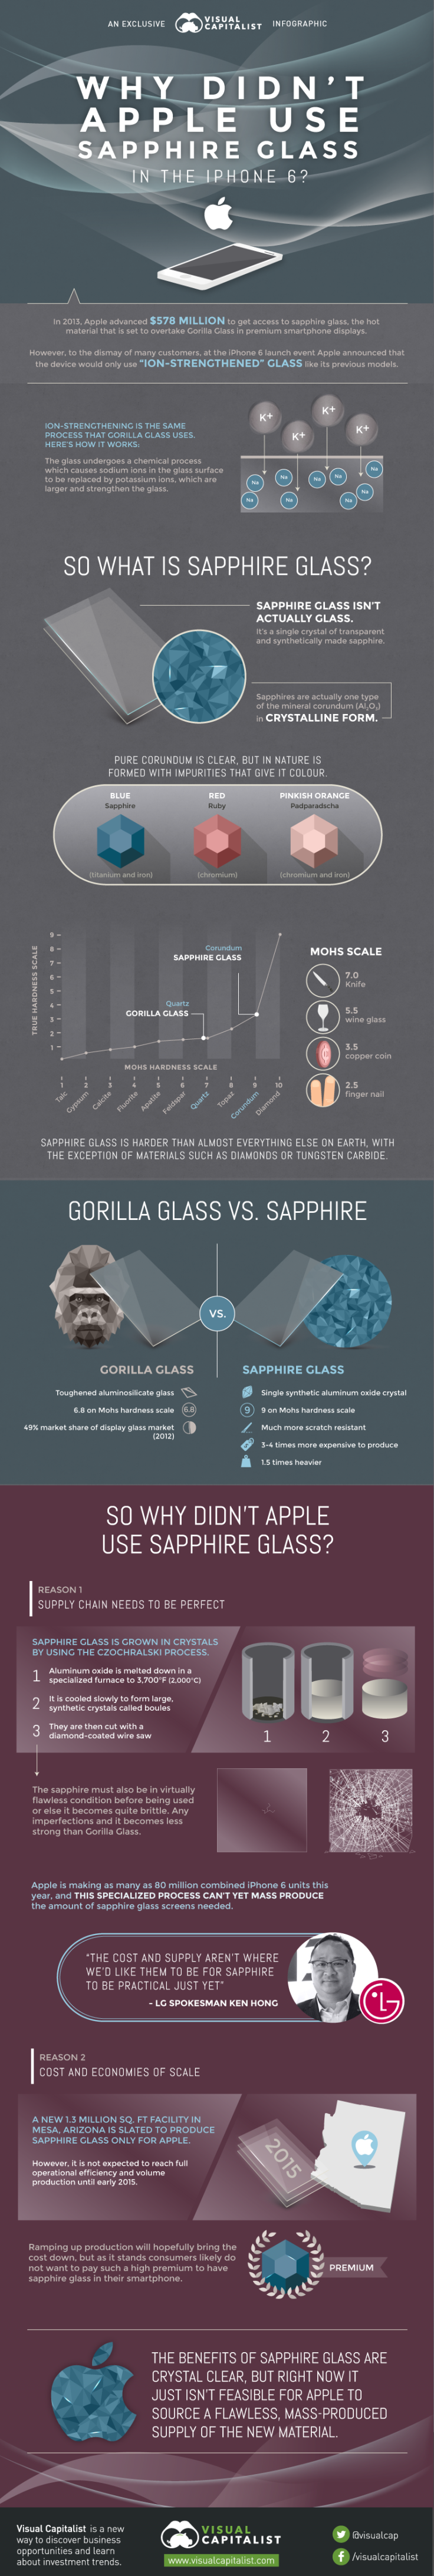 Why Didn't Apple Use Sapphire Glass in the iPhone 6?